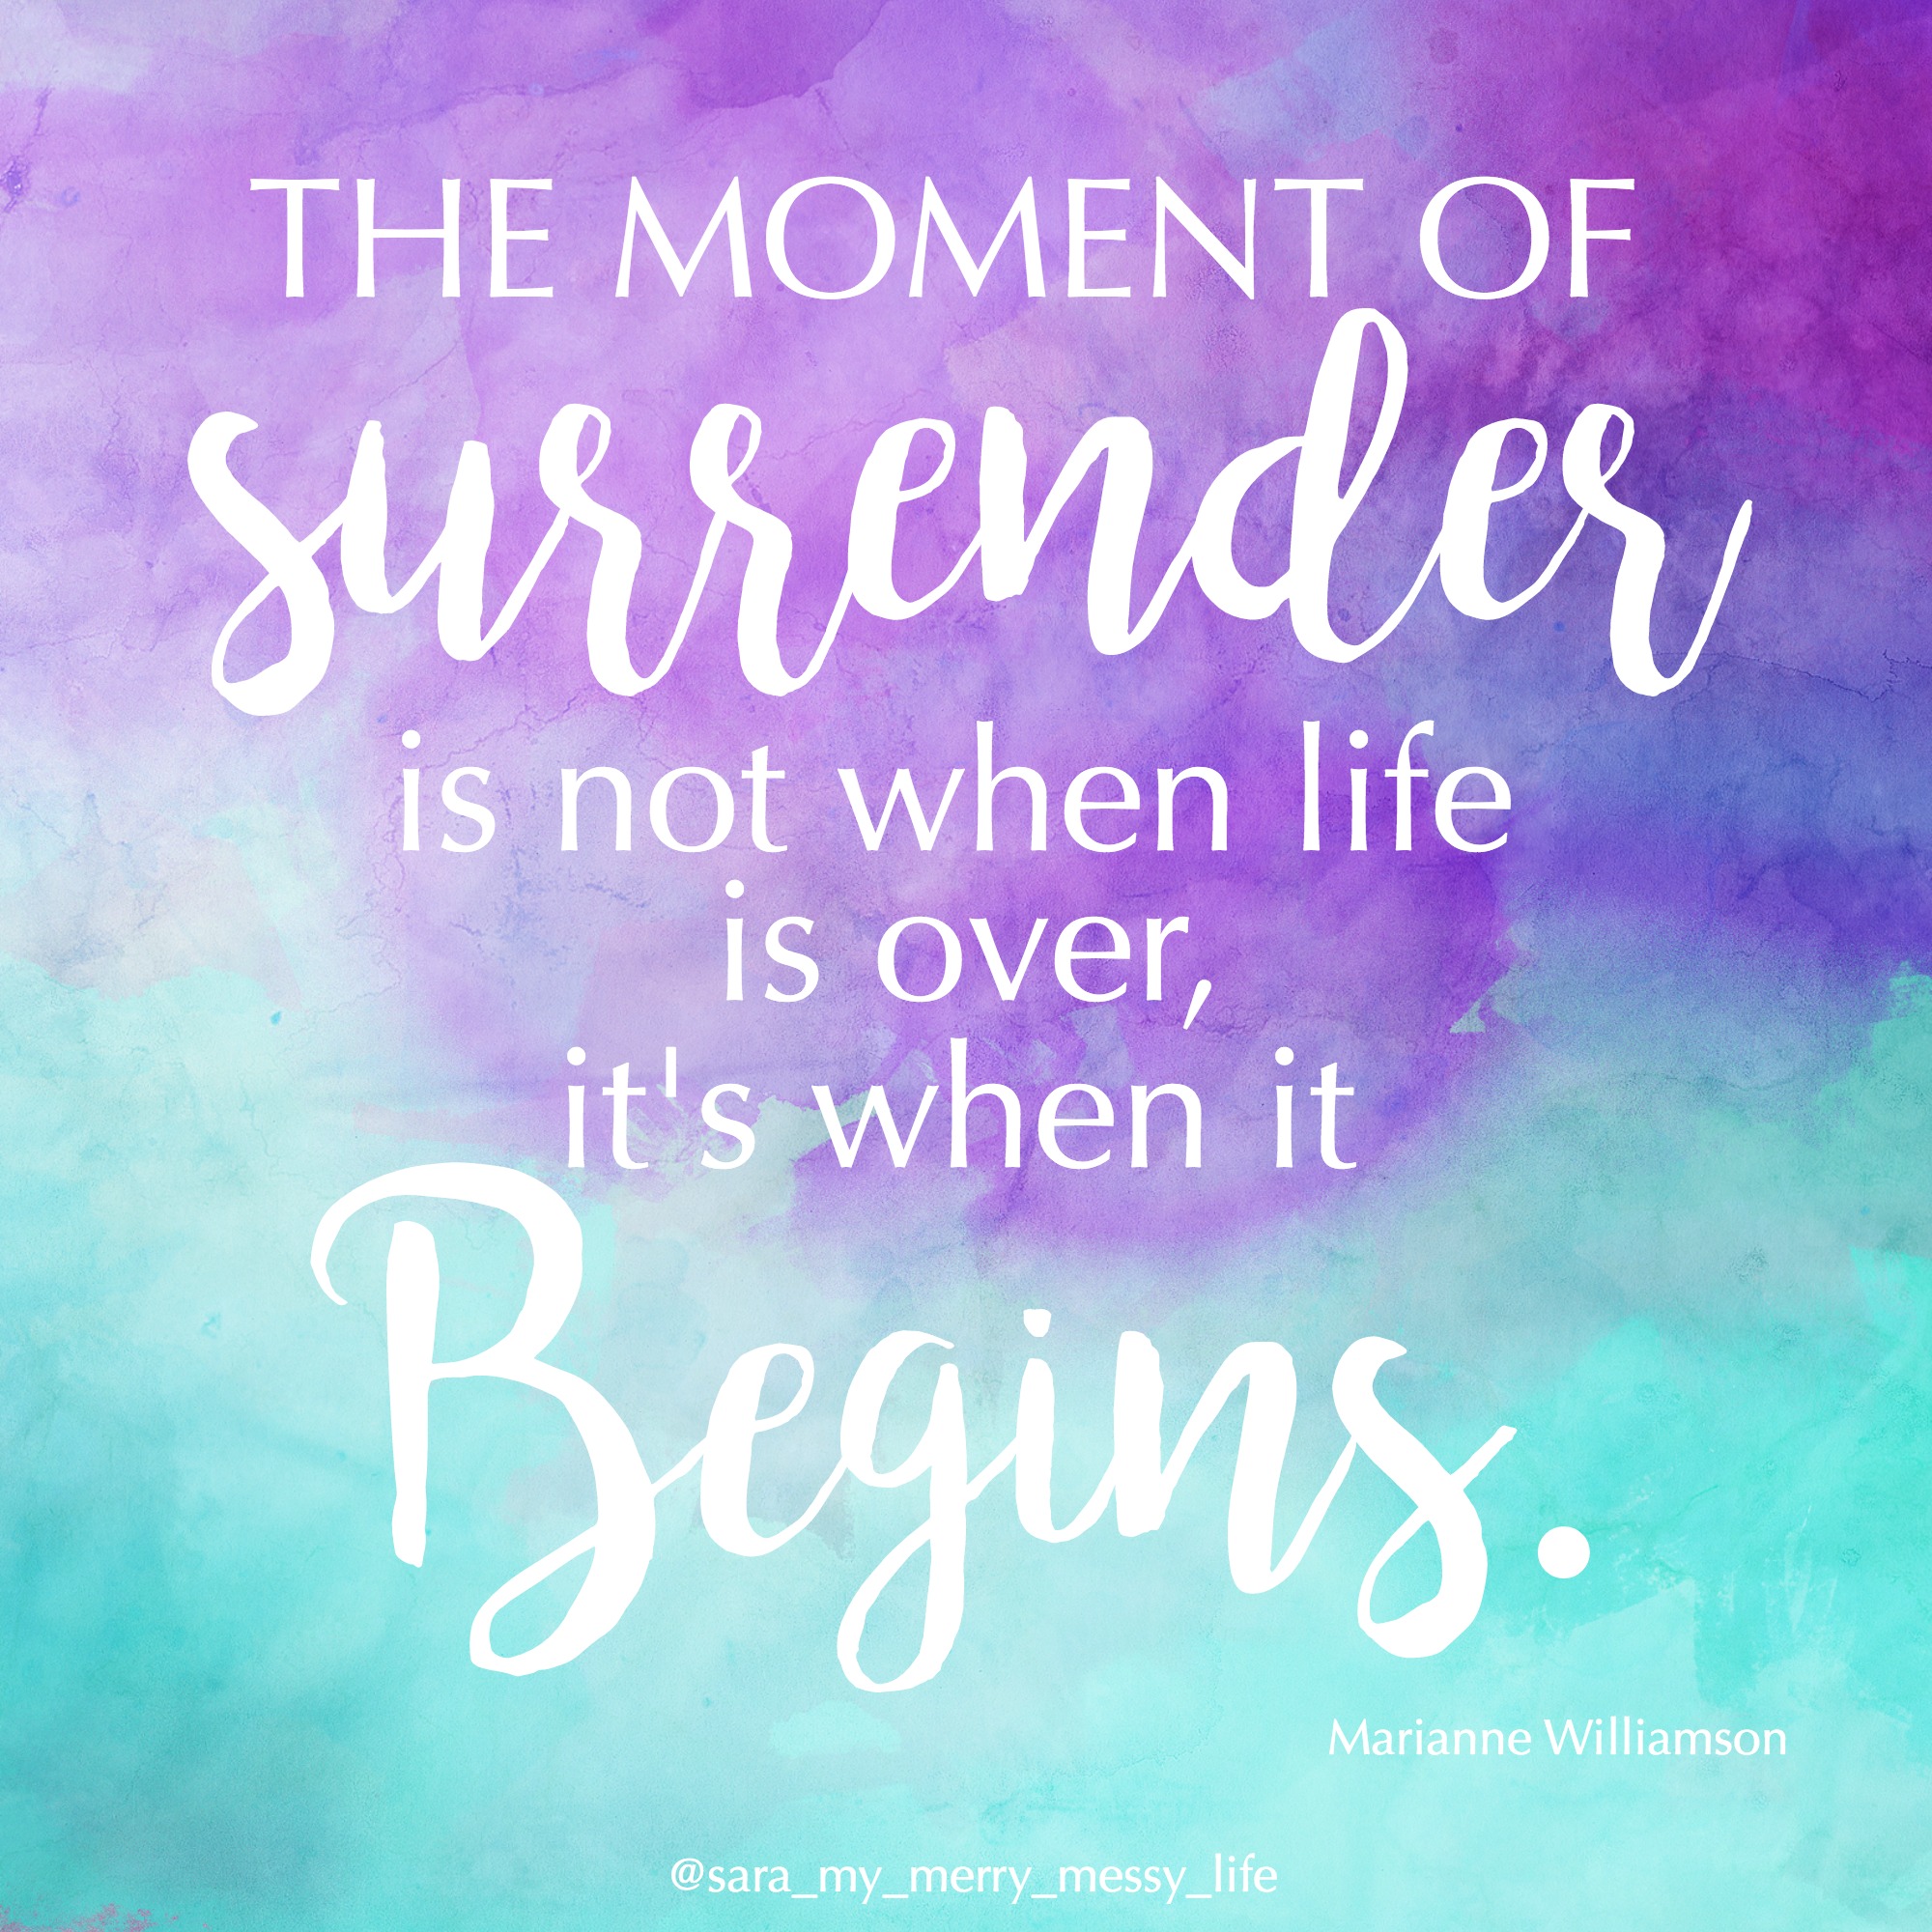 The moment of surrender is not when life is over, it's when it begins. - Marianne Williamson